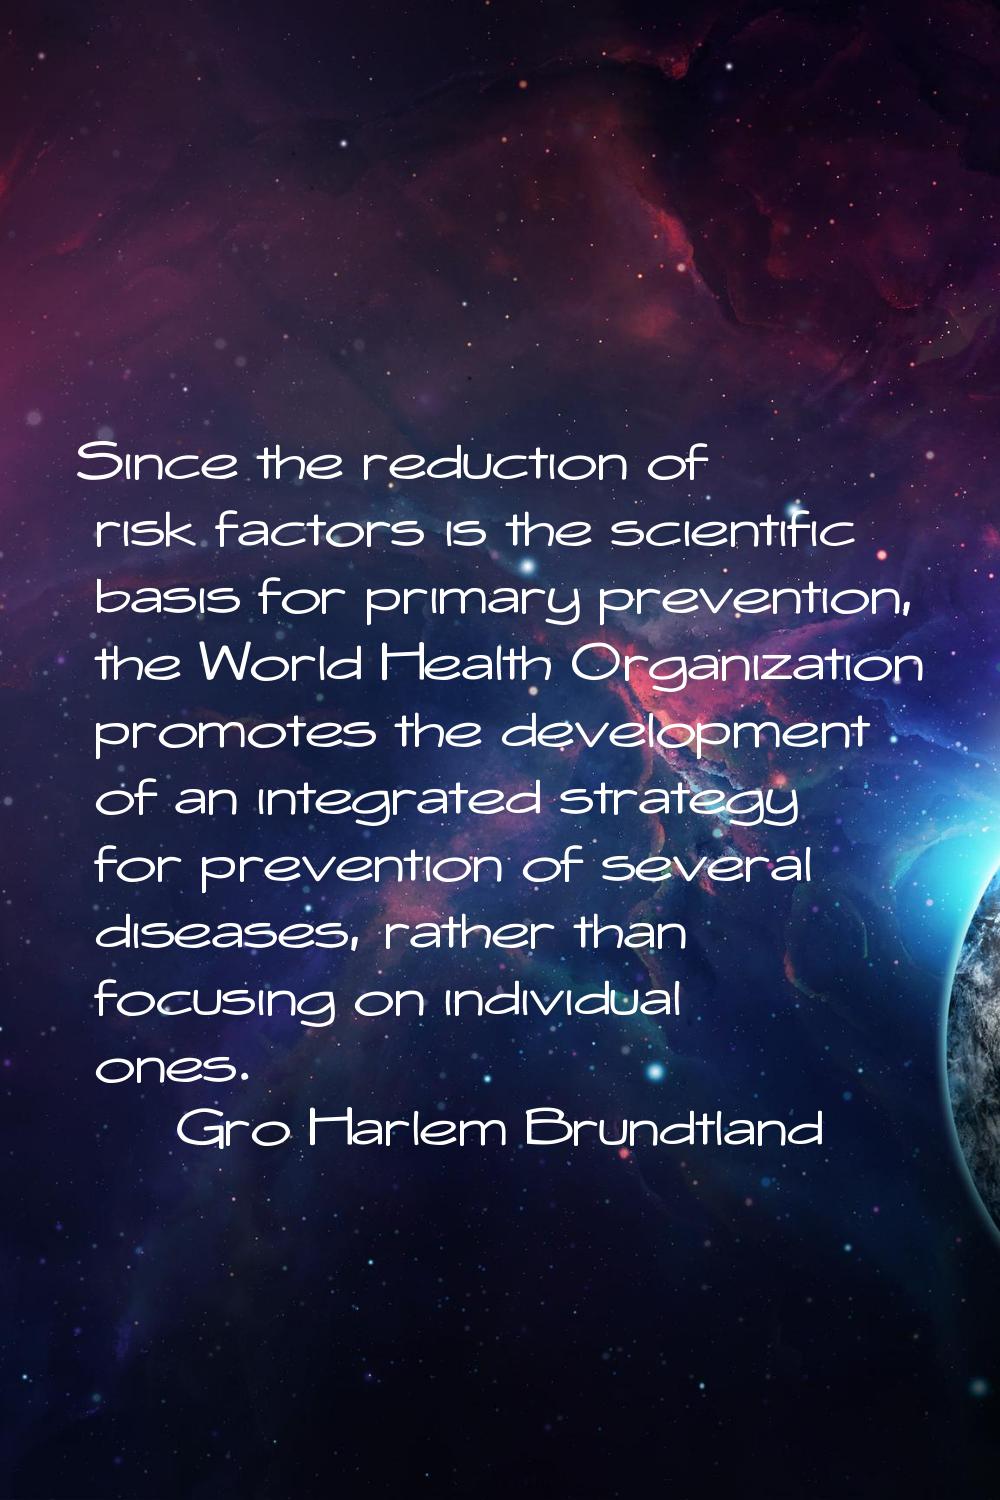 Since the reduction of risk factors is the scientific basis for primary prevention, the World Healt